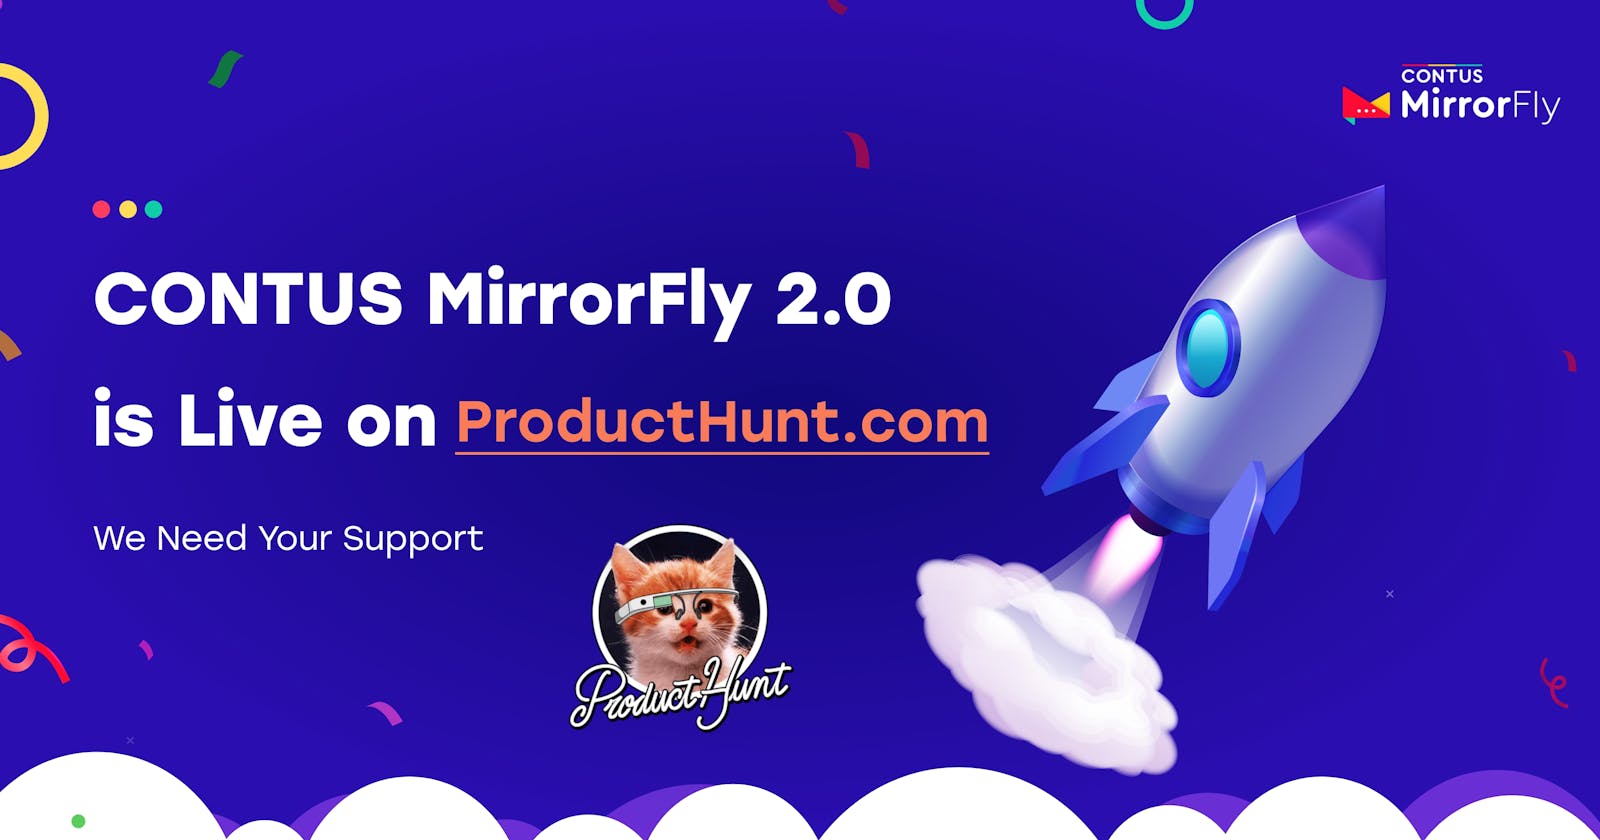 CONTUS MirrorFly2.0 - Now live on Product Hunt